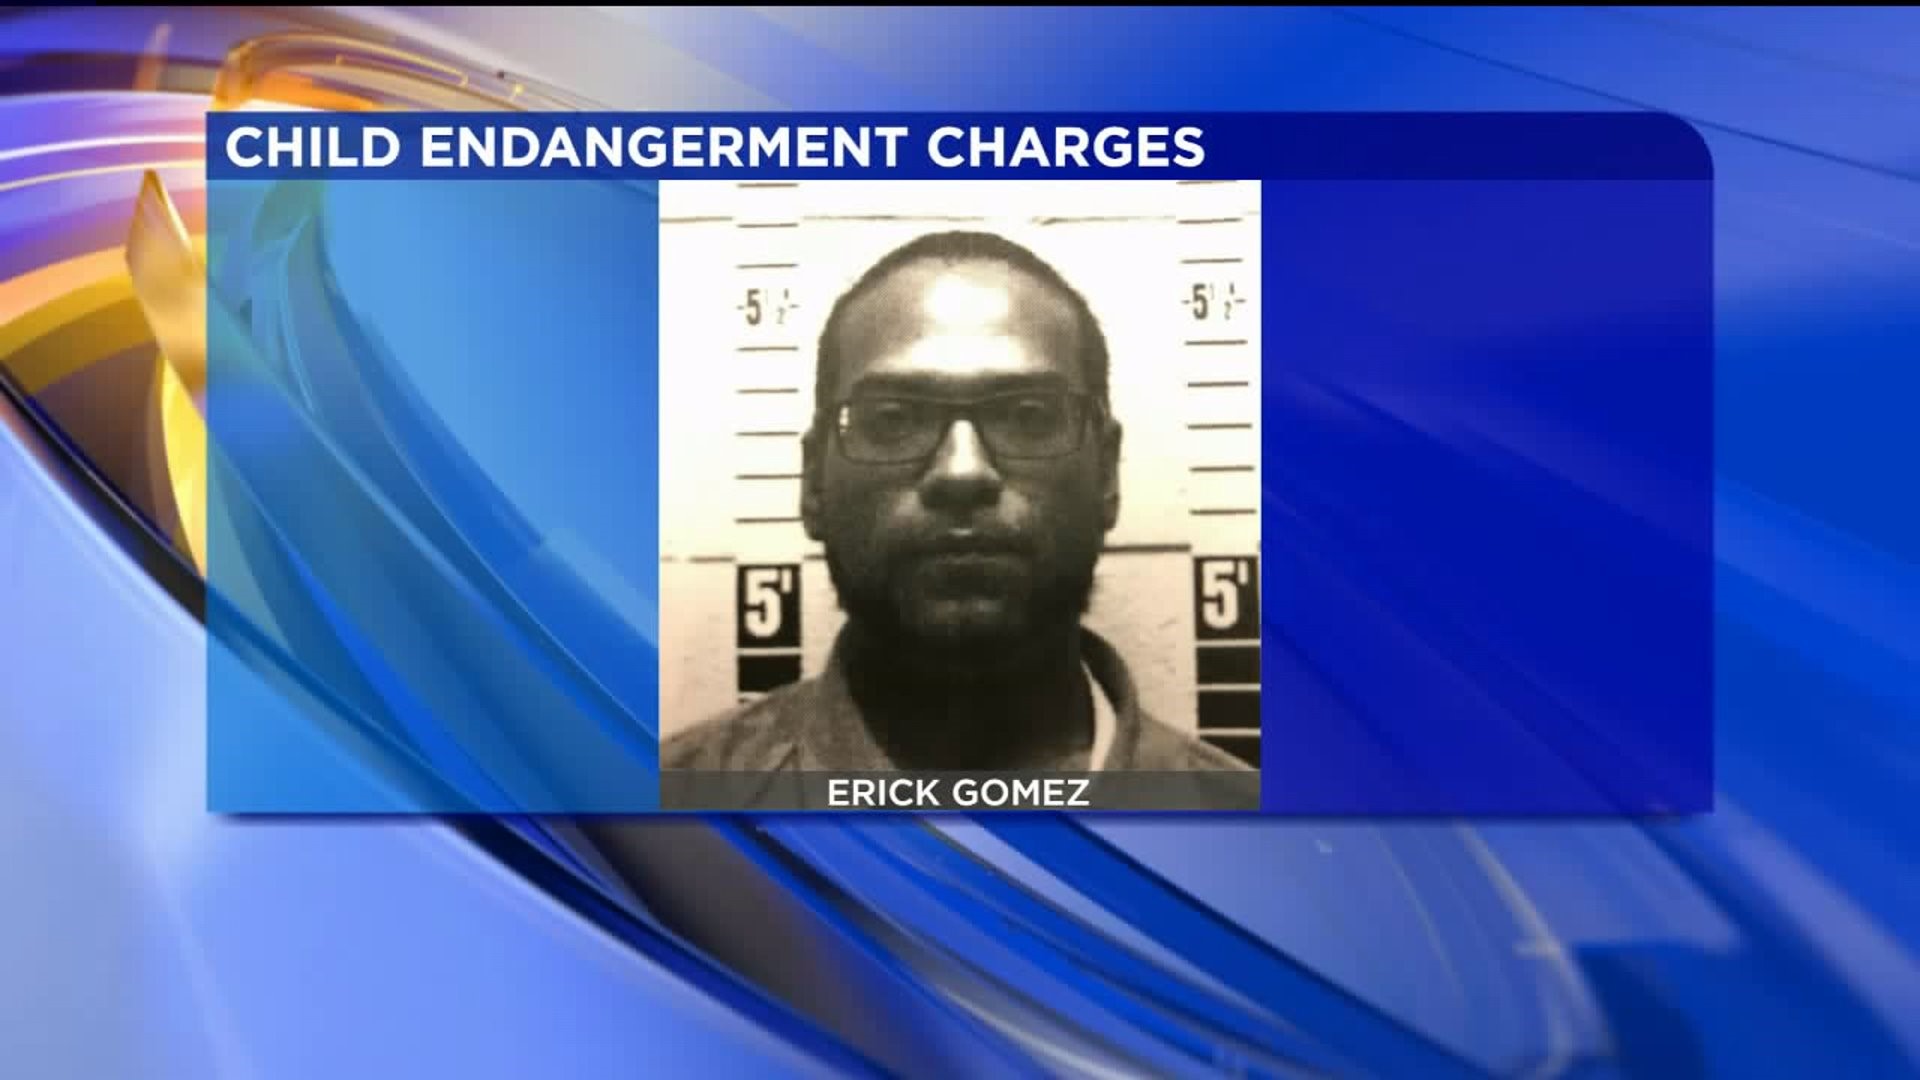 Man Locked up on Drug and Child Endangerment Charges After Traffic Stop